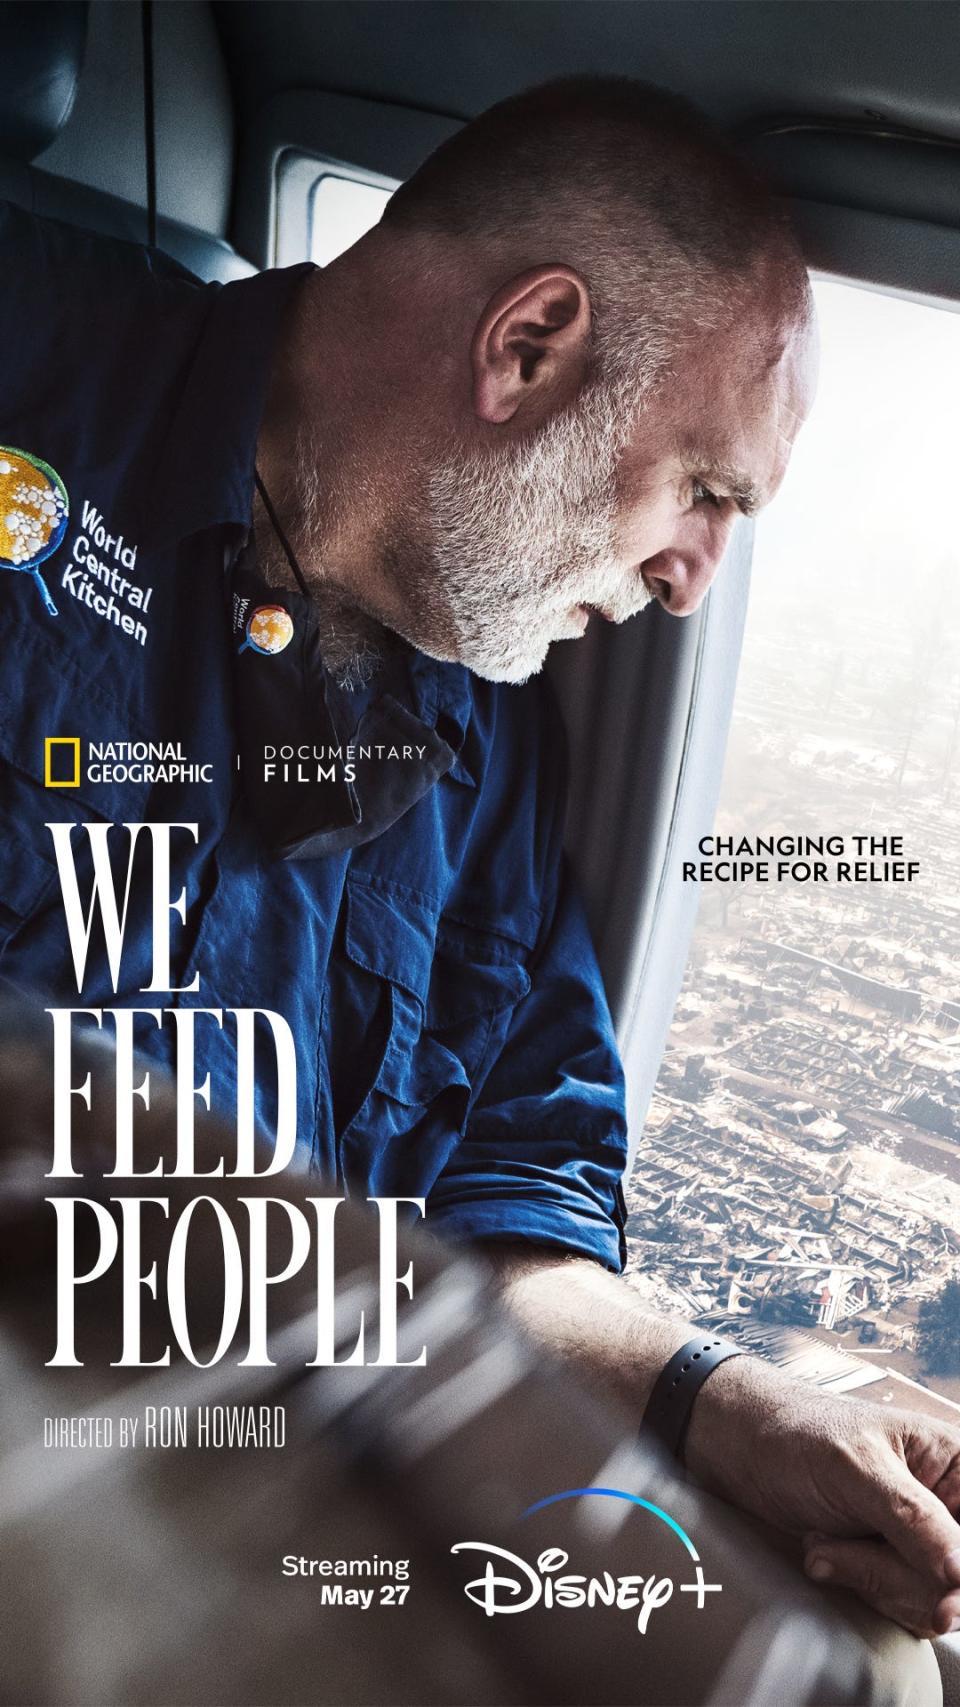 The poster for Ron Howard's "We Feed People," a documentary chronicling the birth and growth of José Andrés' World Central Kitchen.